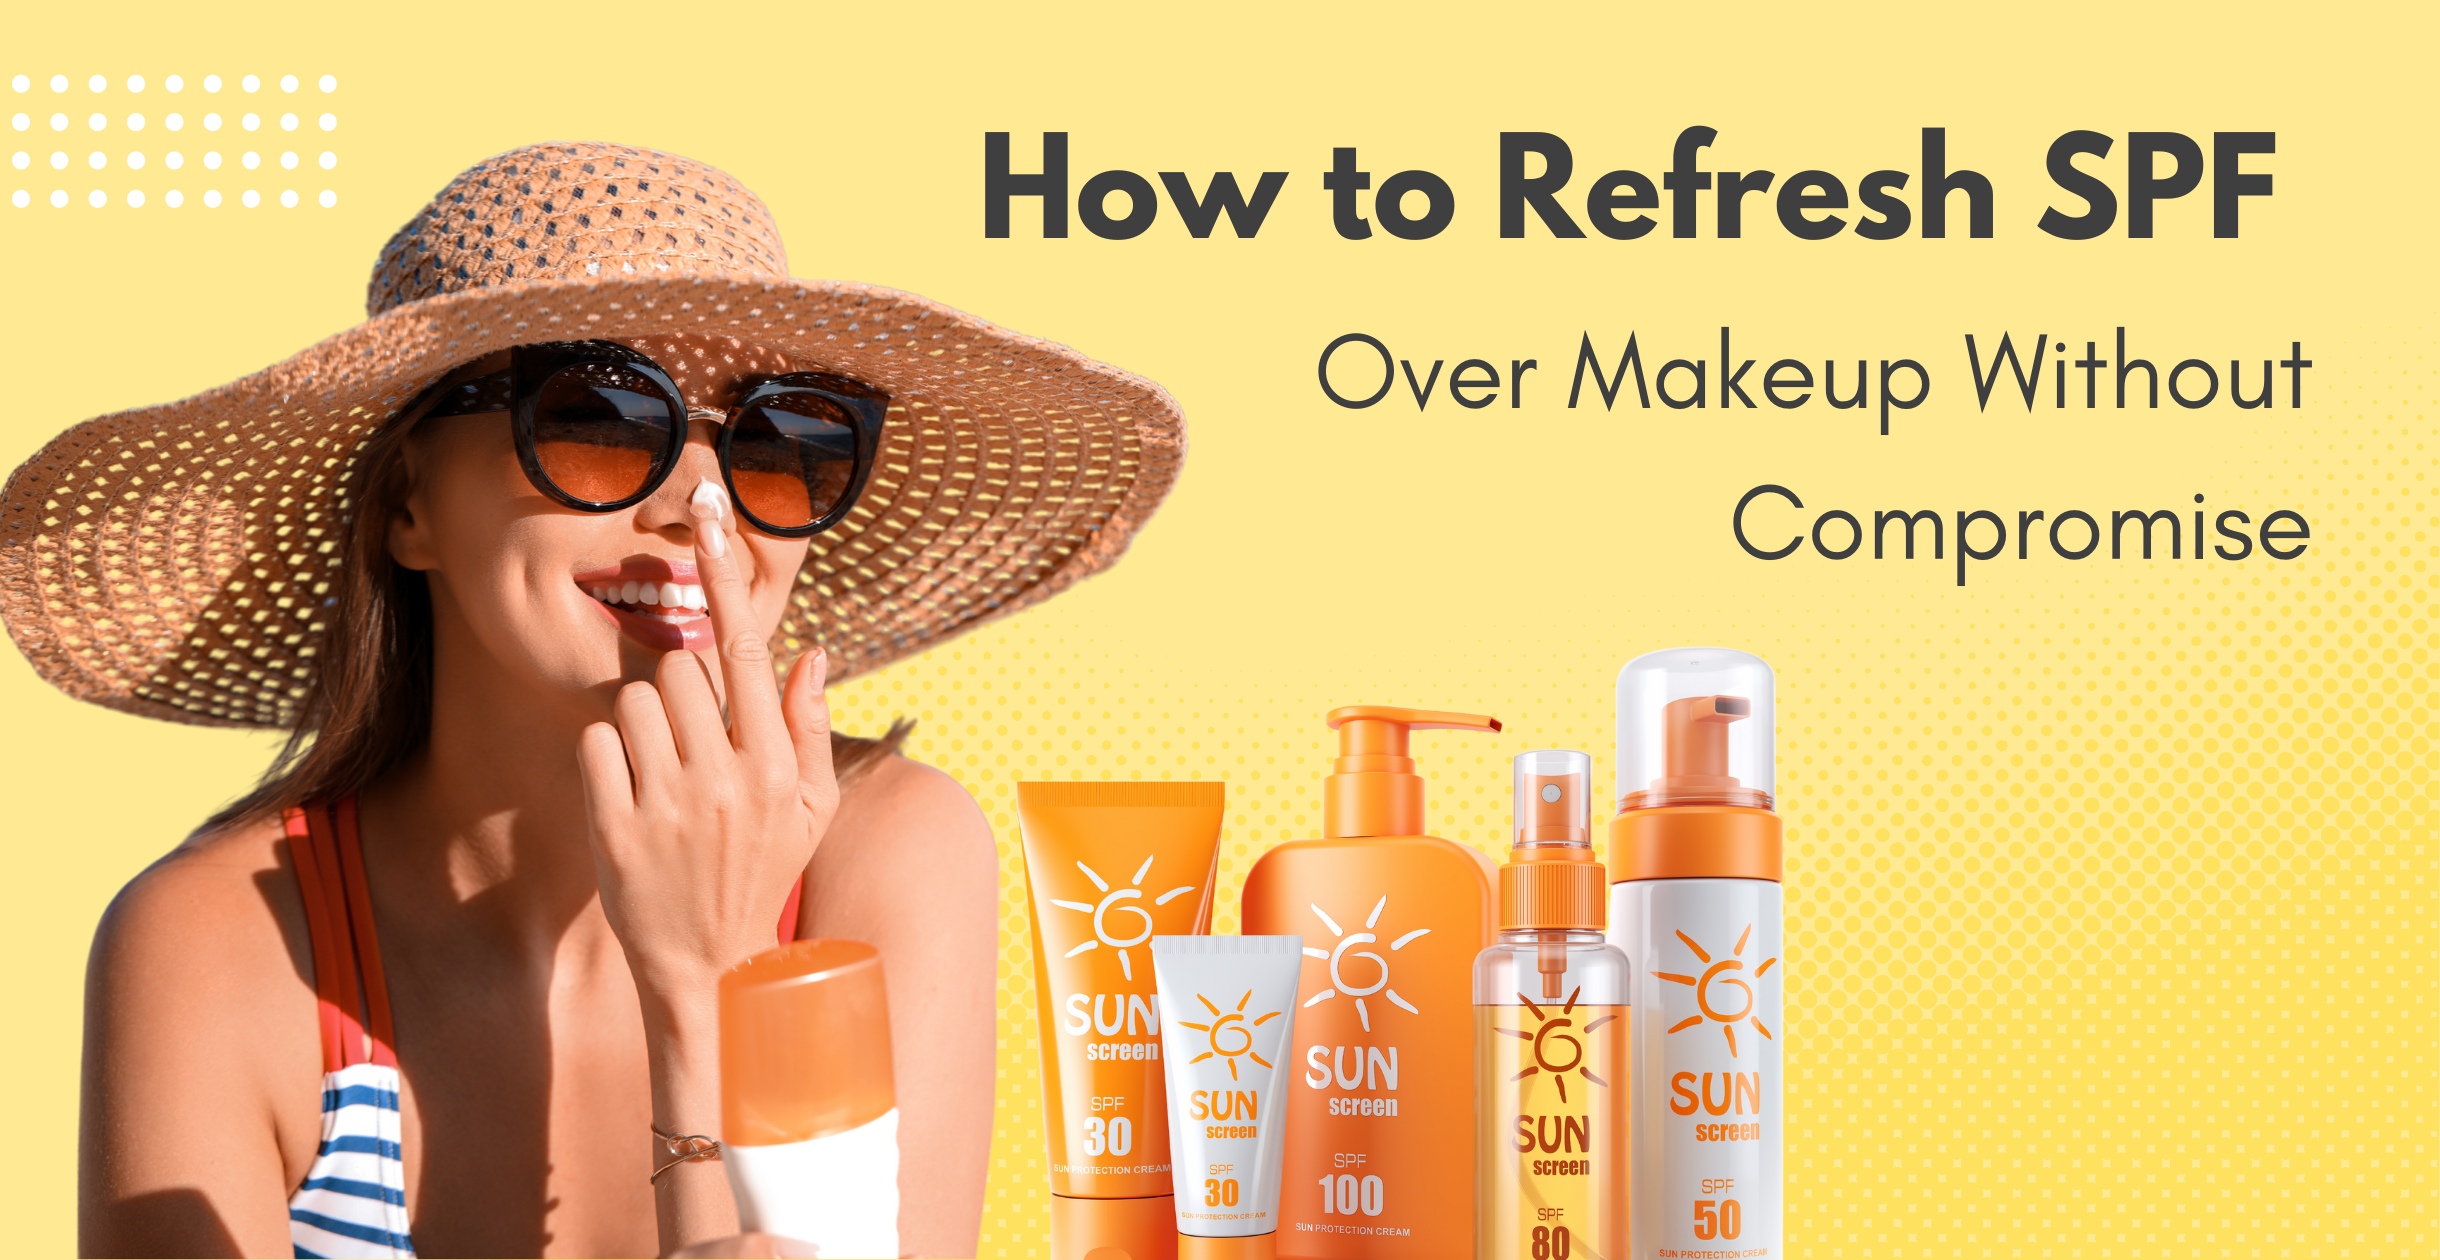 How to Refresh SPF Over Makeup Without Compromise